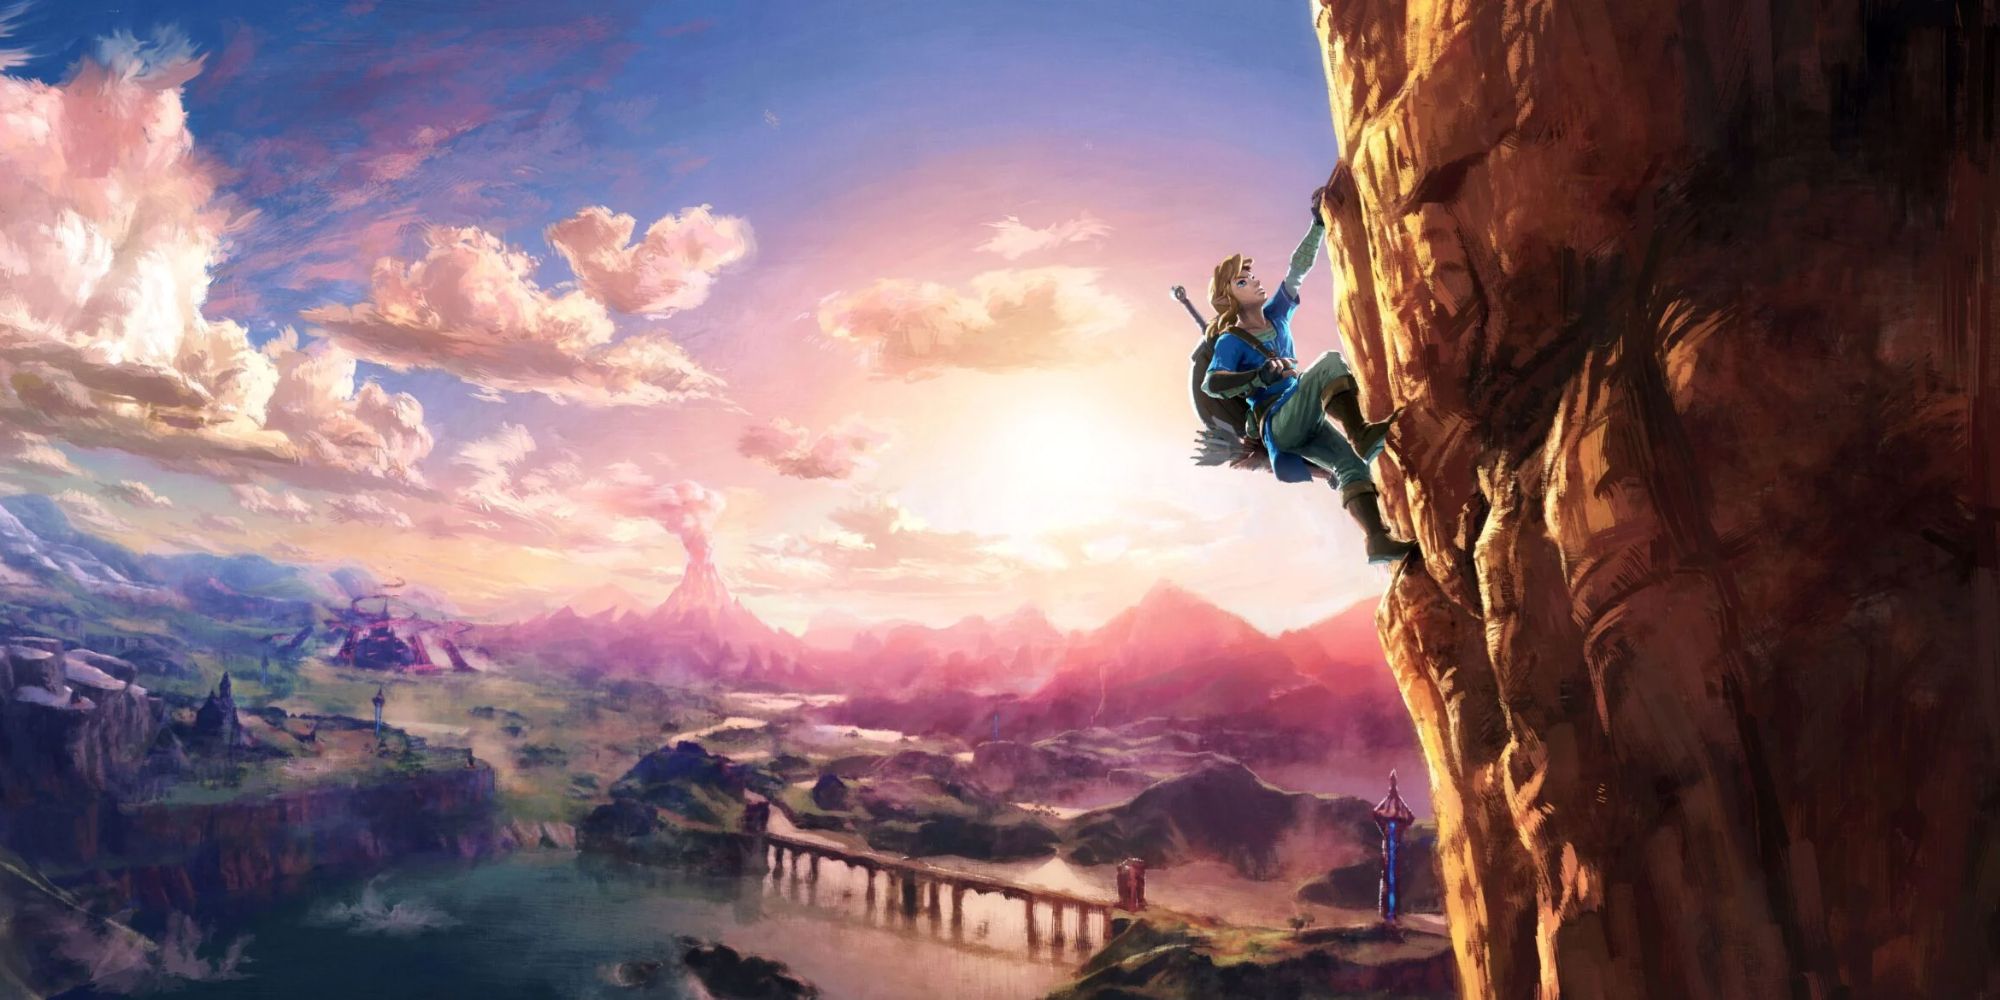 Link scaling a mountain in BOTW artwork